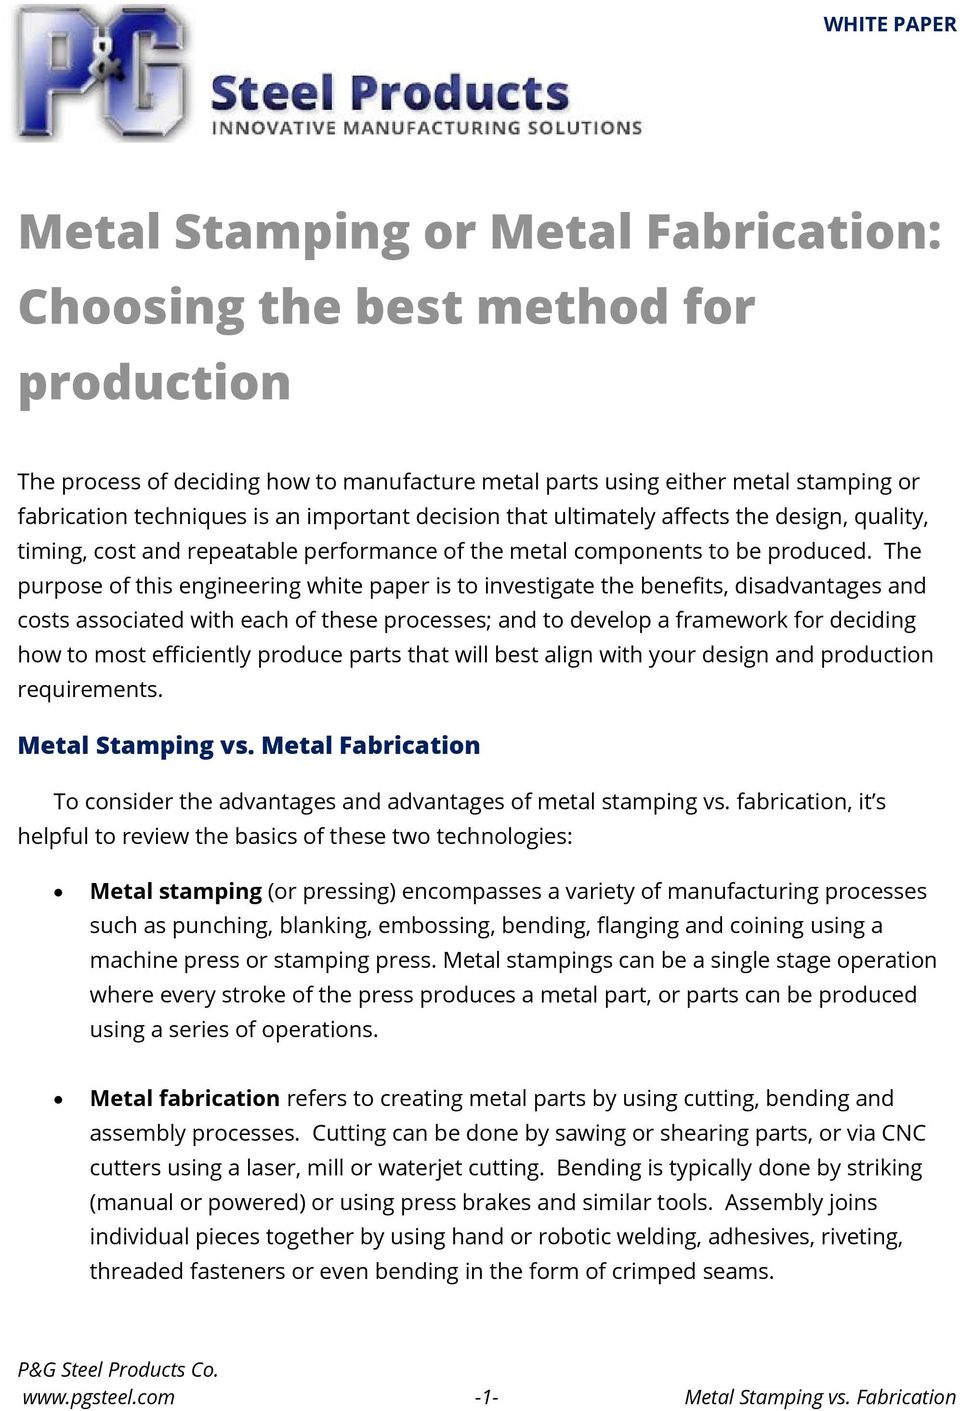 The purpose of this engineering white paper is to investigate the benefits, disadvantages and costs associated with each of these processes; and to develop a framework for deciding how to most